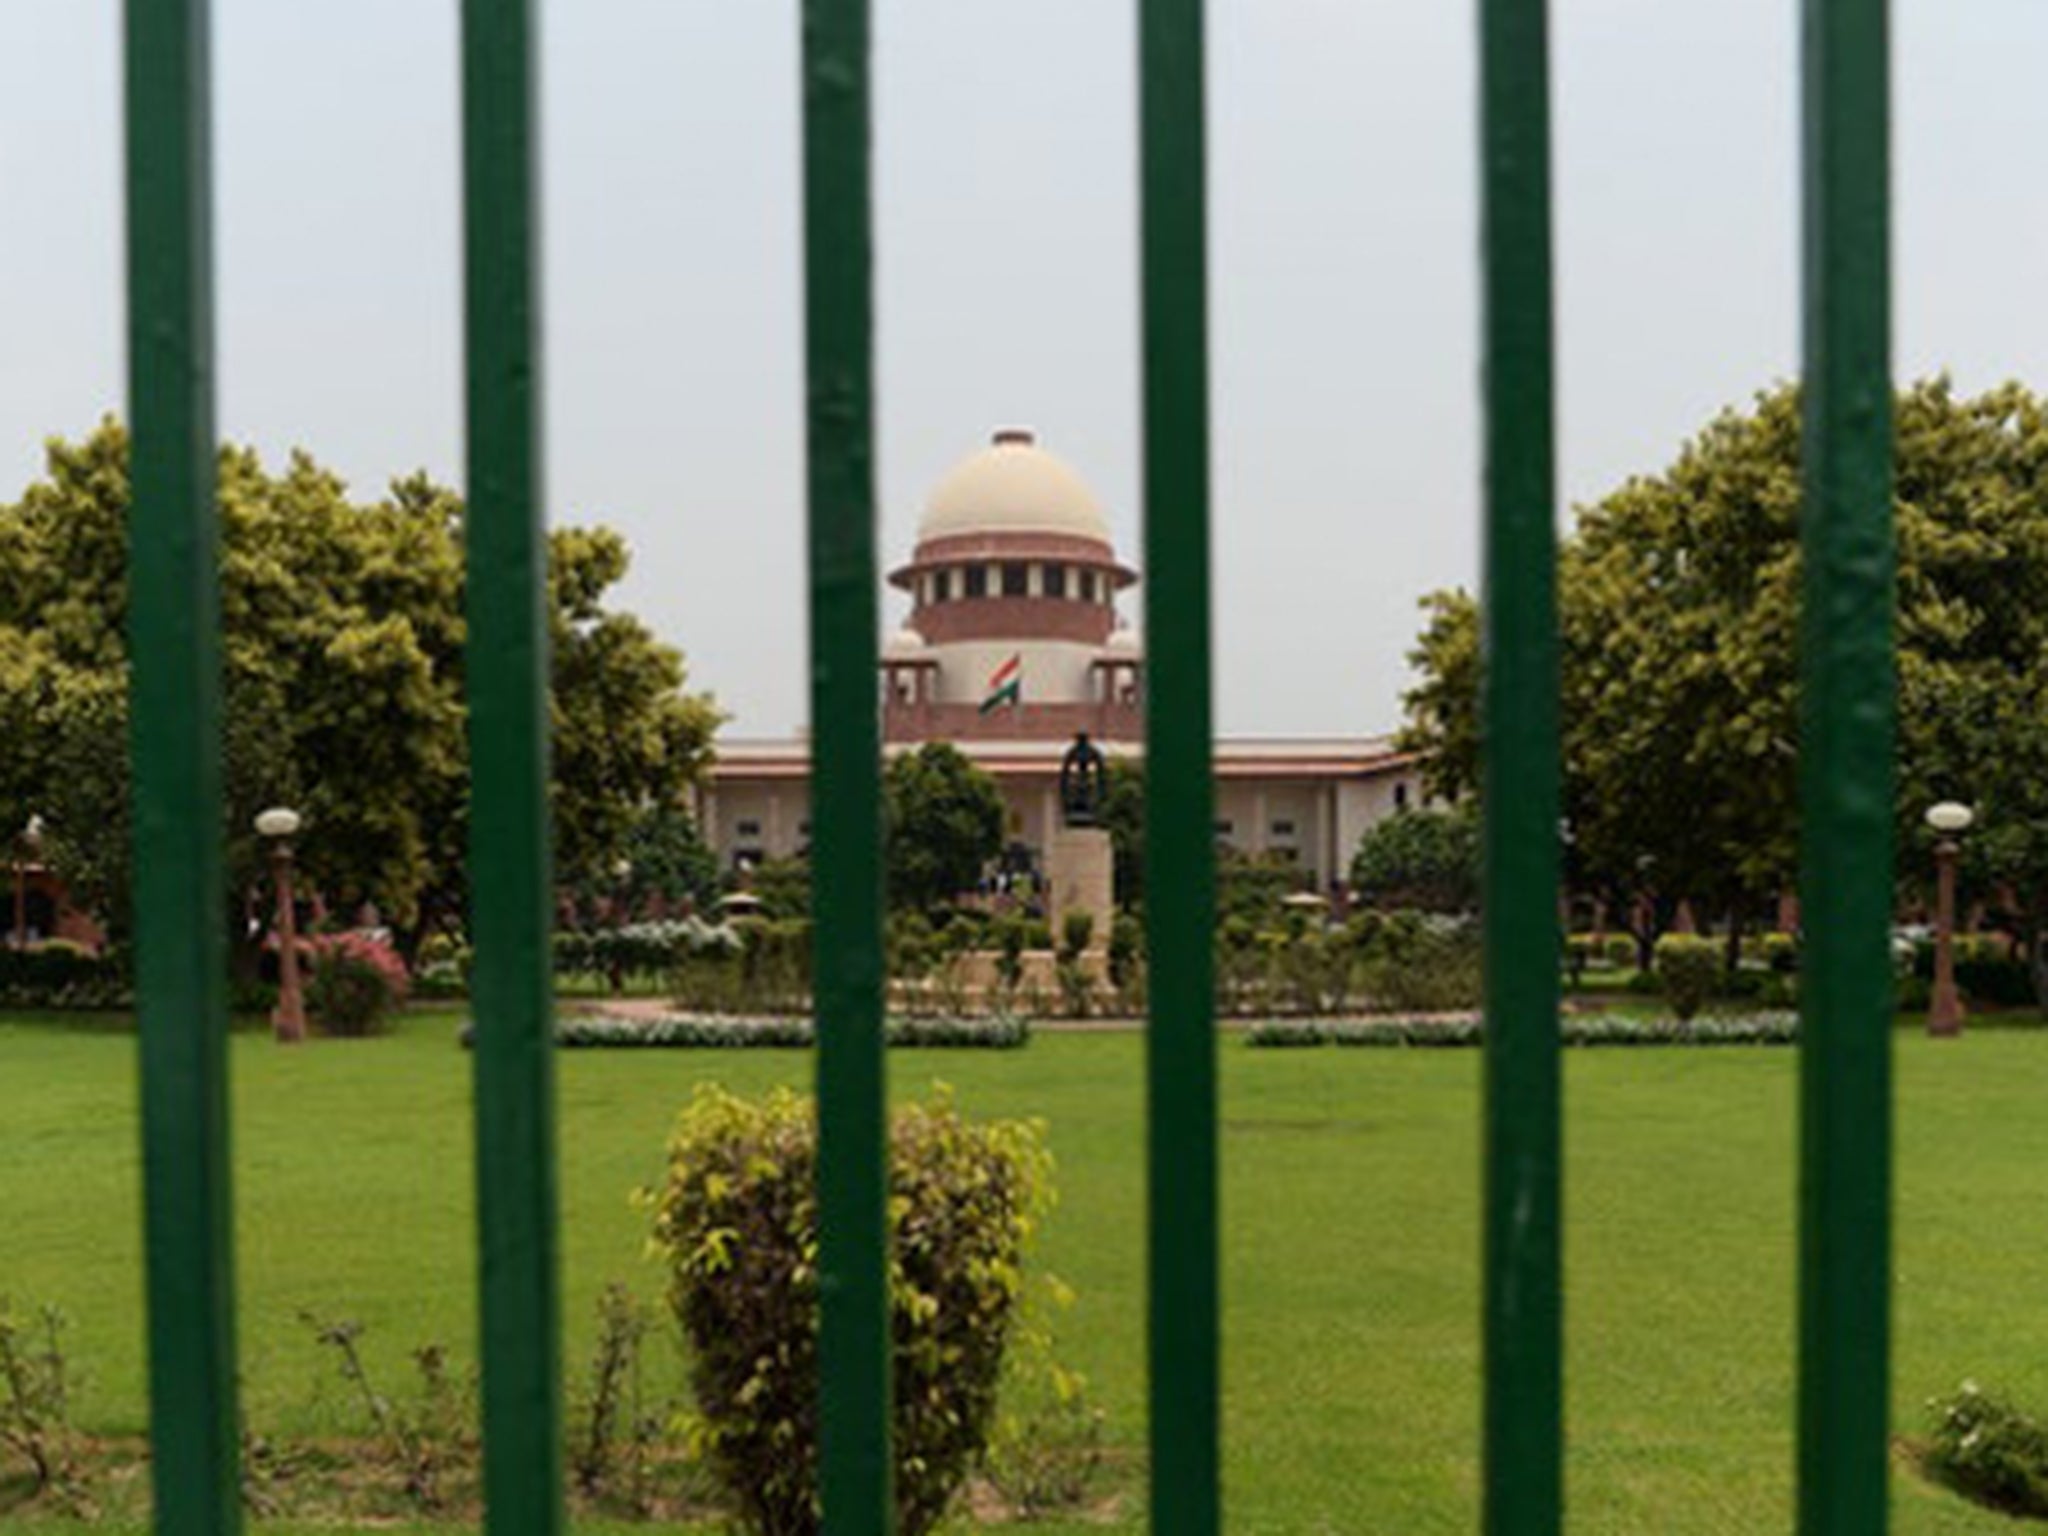 The Supreme Court of India has questioned the necessity of a colonial-era sedition law